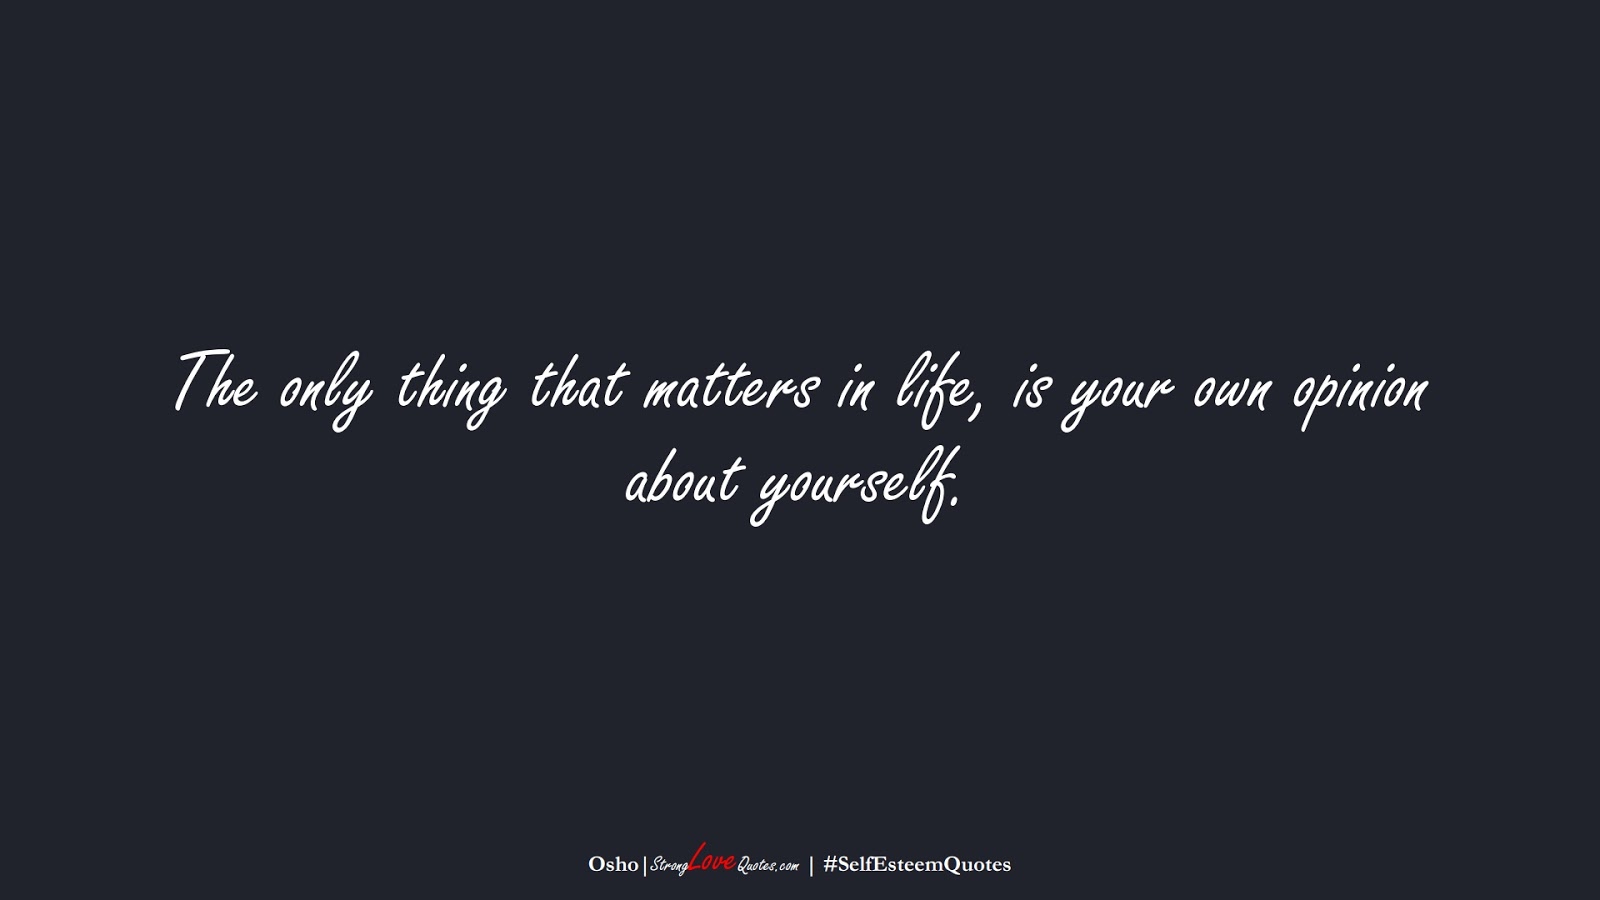 The only thing that matters in life, is your own opinion about yourself. (Osho);  #SelfEsteemQuotes